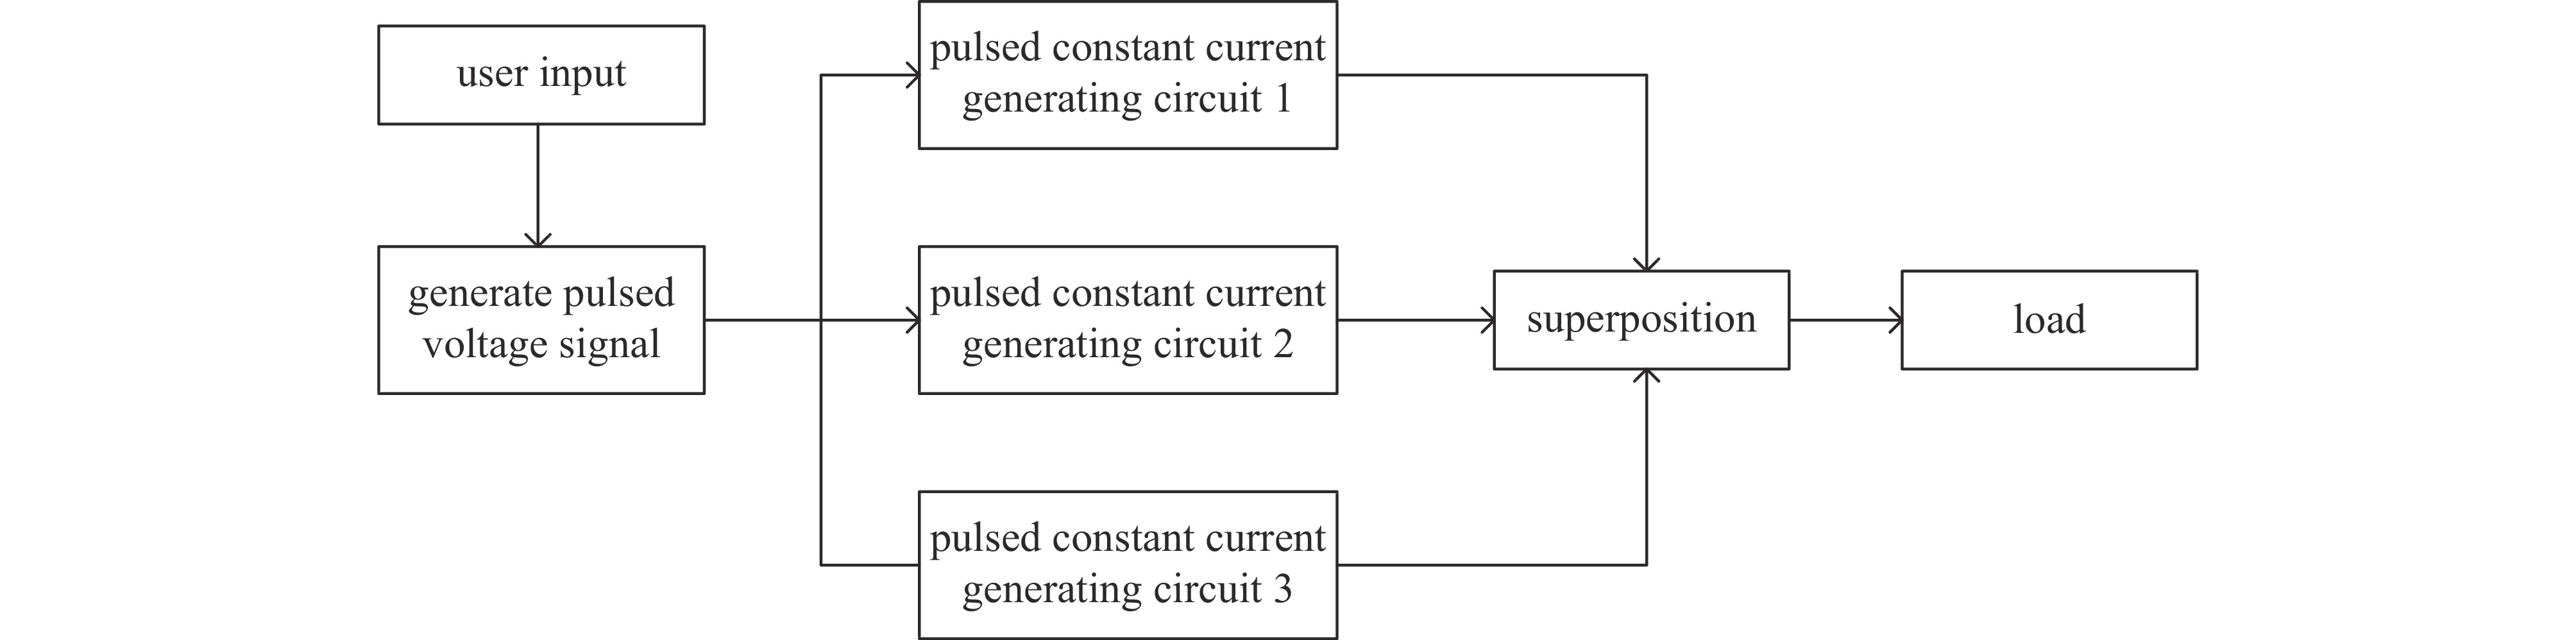 Basic structure of pulse constant current source